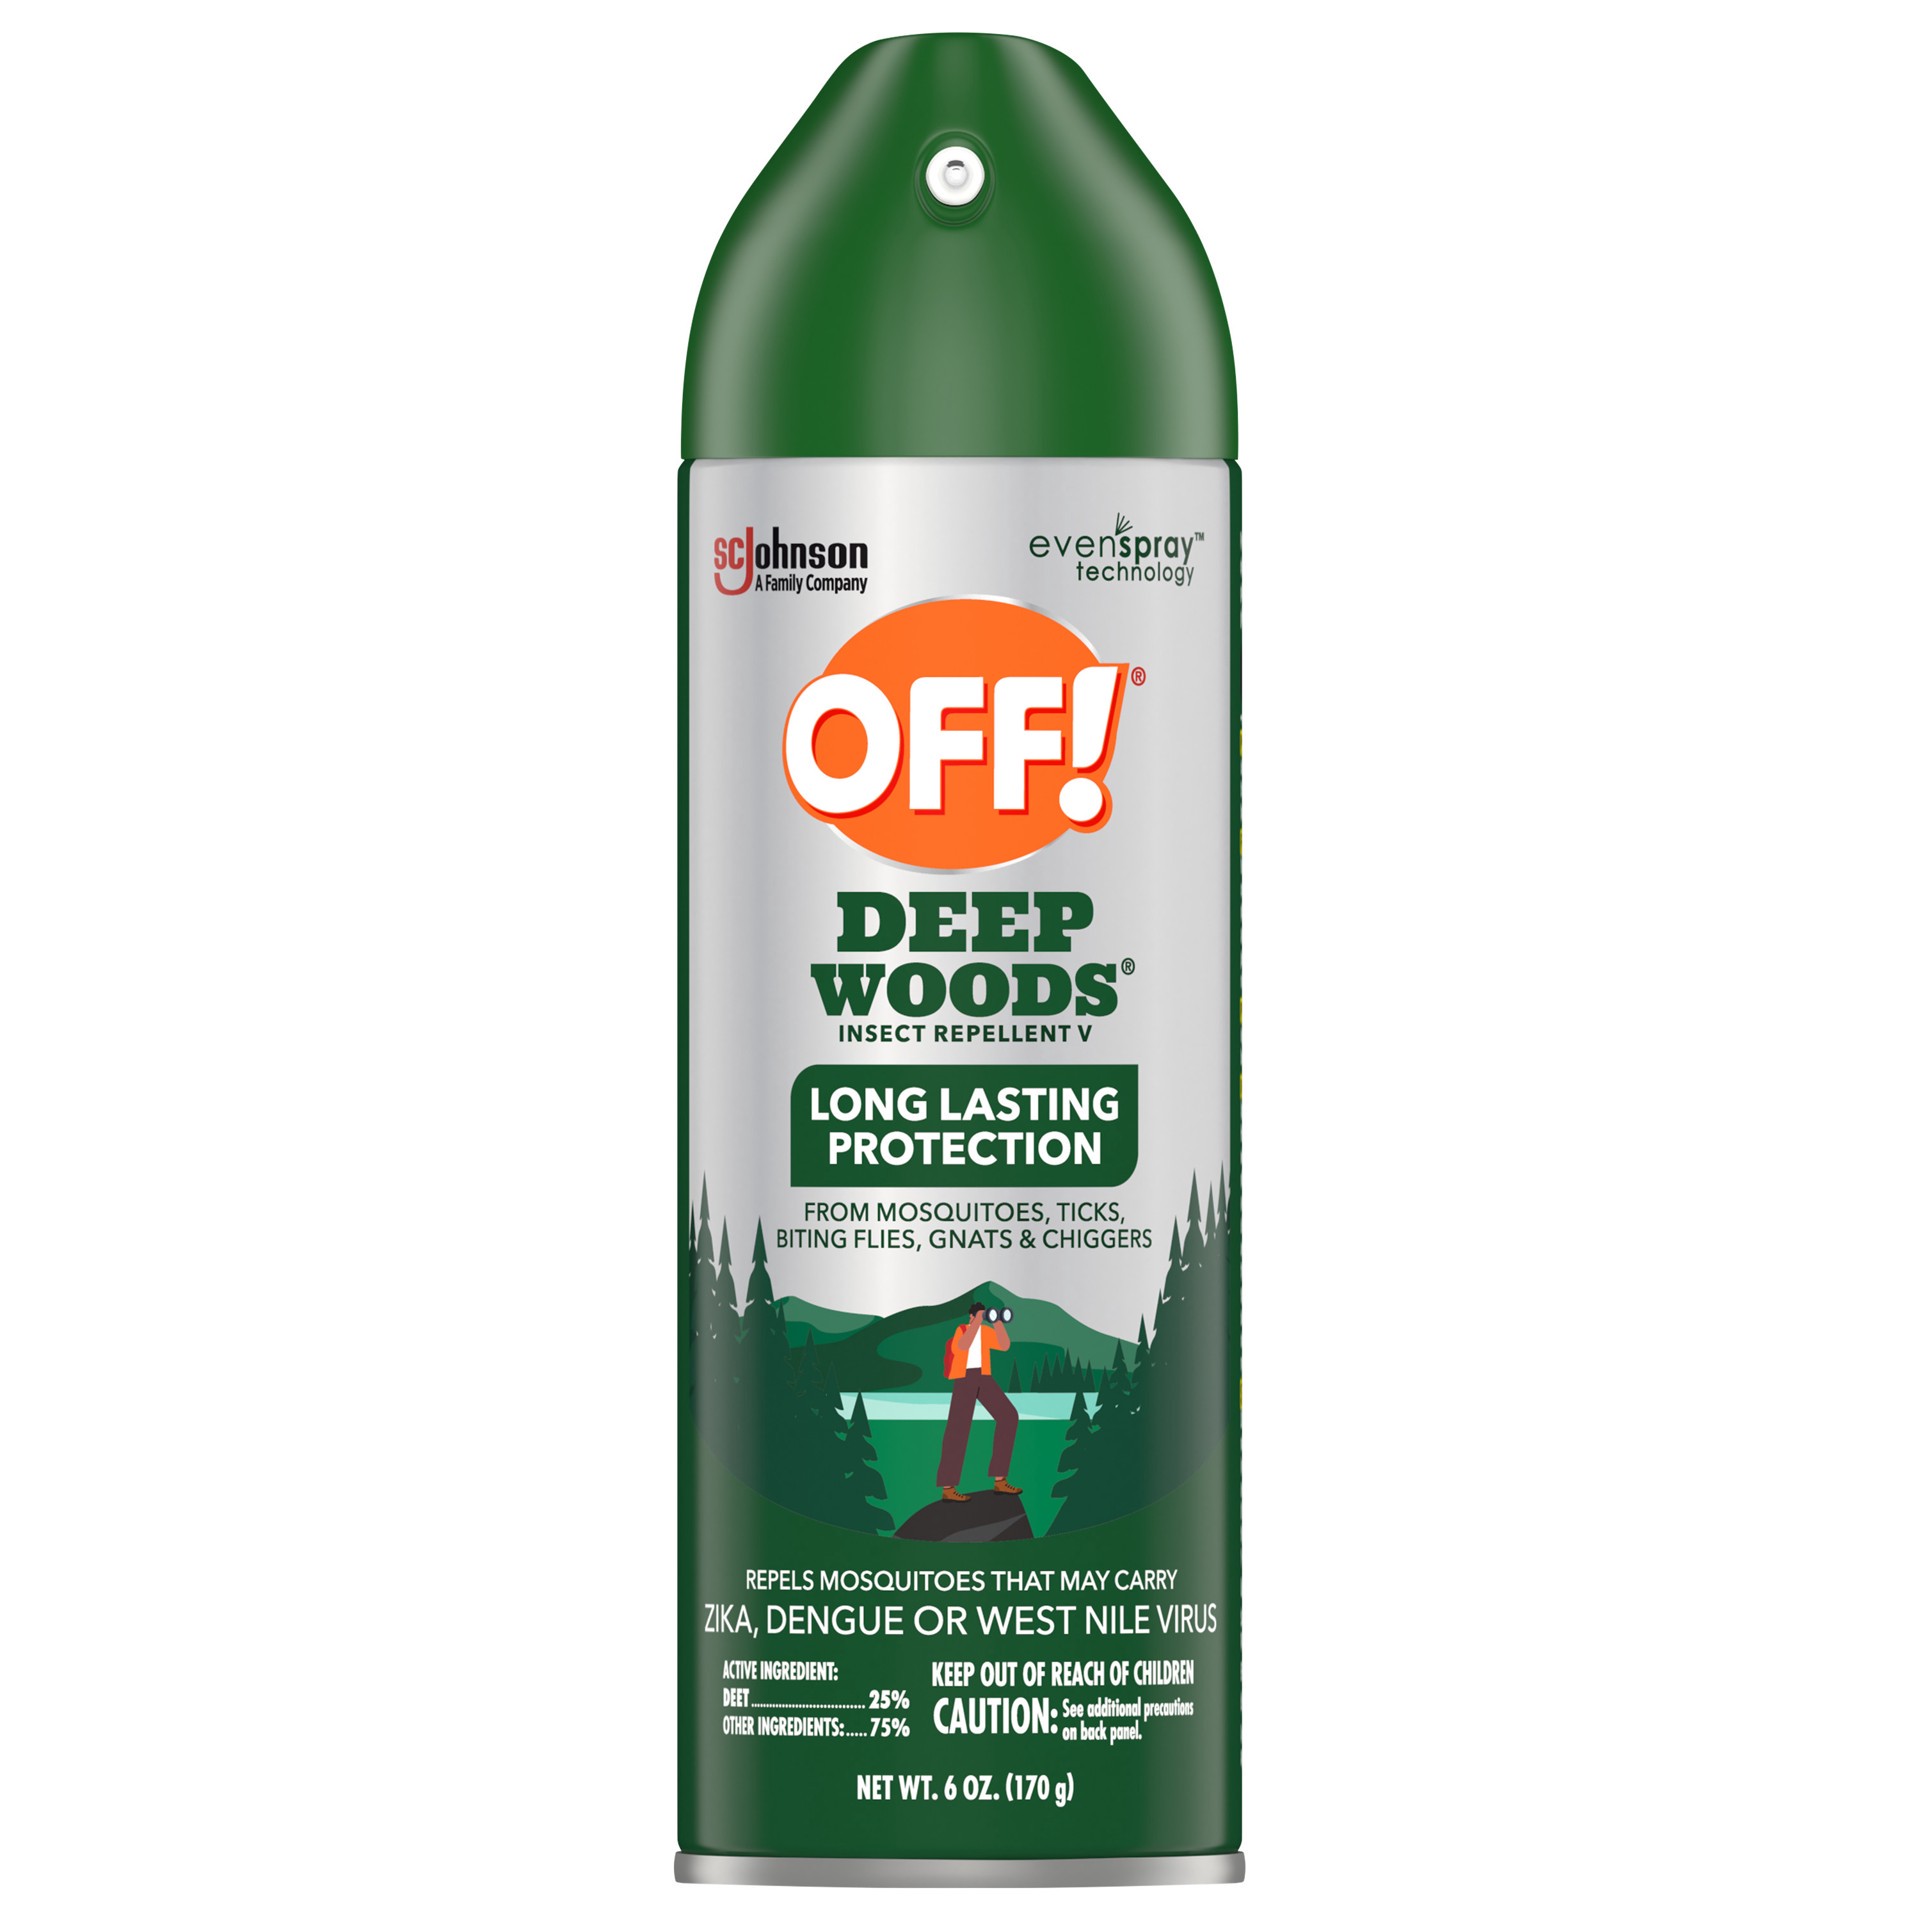 slide 1 of 5, OFF! Deep Woods Mosquito Repellent V, up to 8 Hours of Protection from Mosquitoes, 6 oz, 6 oz